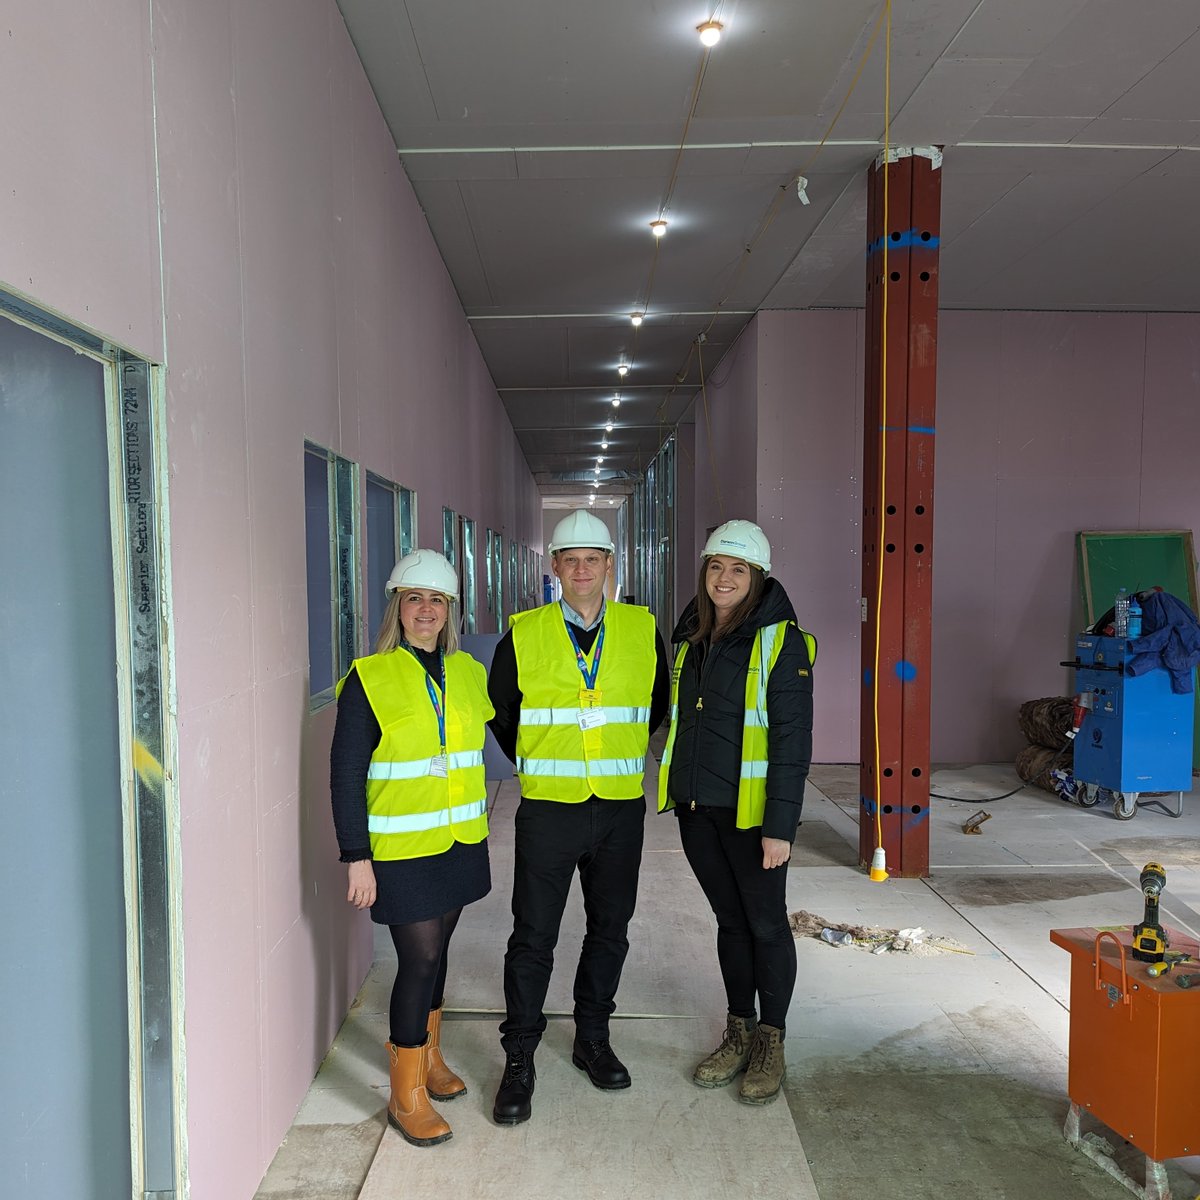 It's been a busy month of development on our Stoke Mandeville Hospital site.

Our Chair @HightonDavid, new Chief Estates and Facilities Officer Charmaine Hope and Chief Finance Officer Jon Evans toured the new 21 bedded ward and the extension of our Research and Innovation Centre…